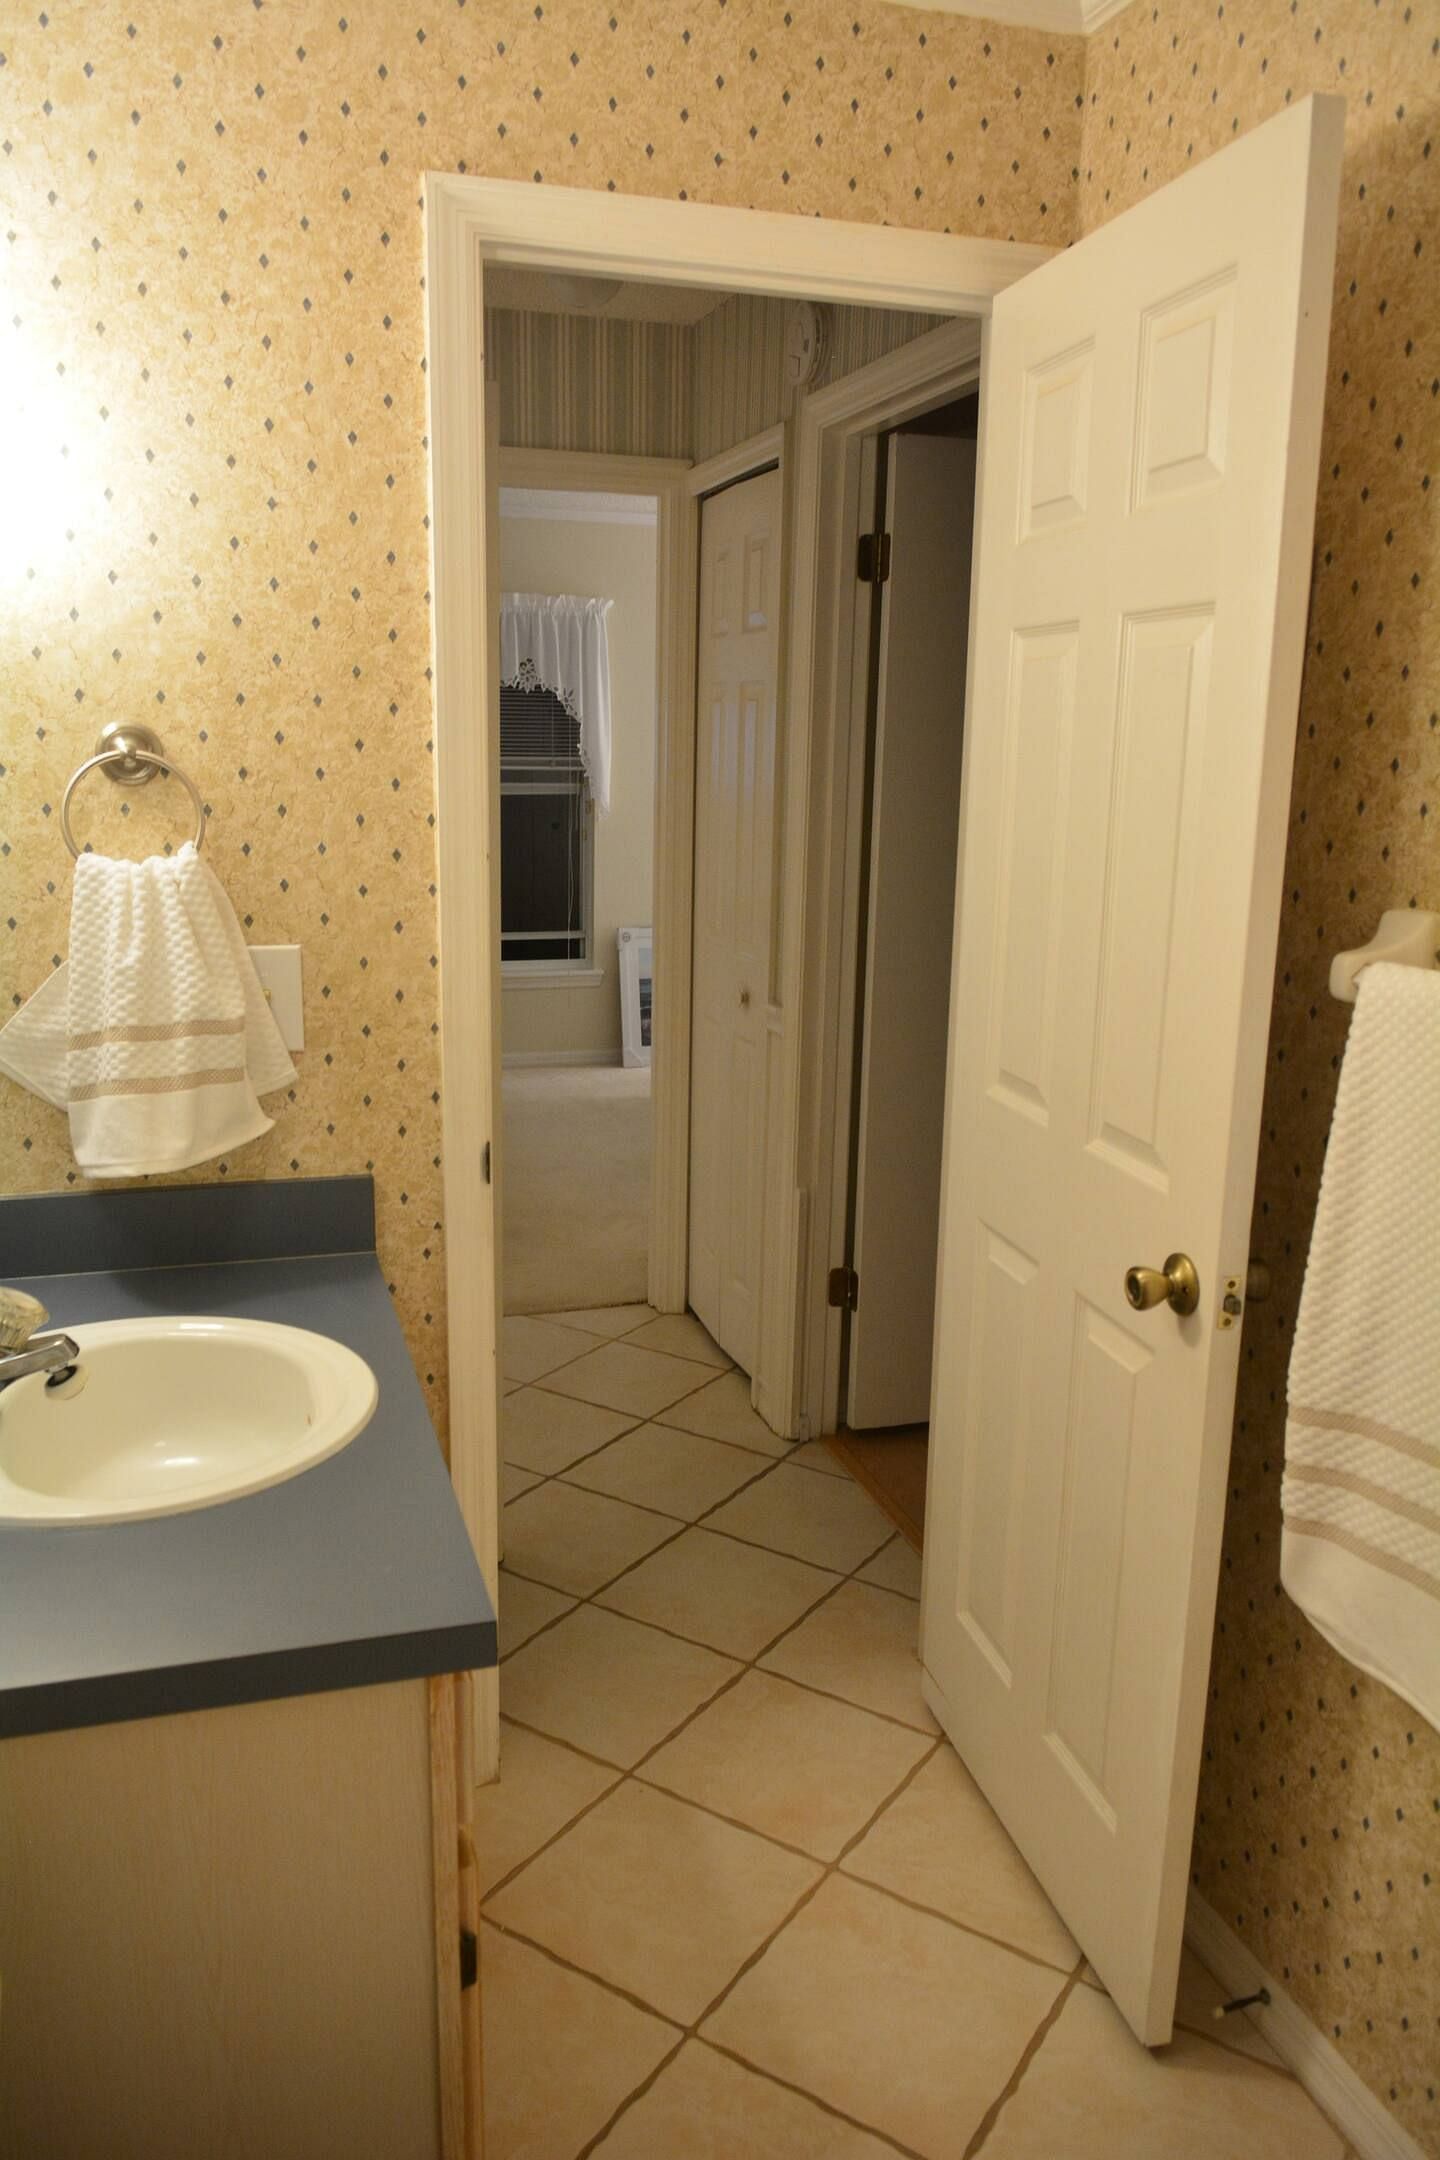 JWguest House at Orlando, Florida | Private Home with Pool, 3 Bd 2 Bath, Close to Disney | Jwbnb no brobnb 27